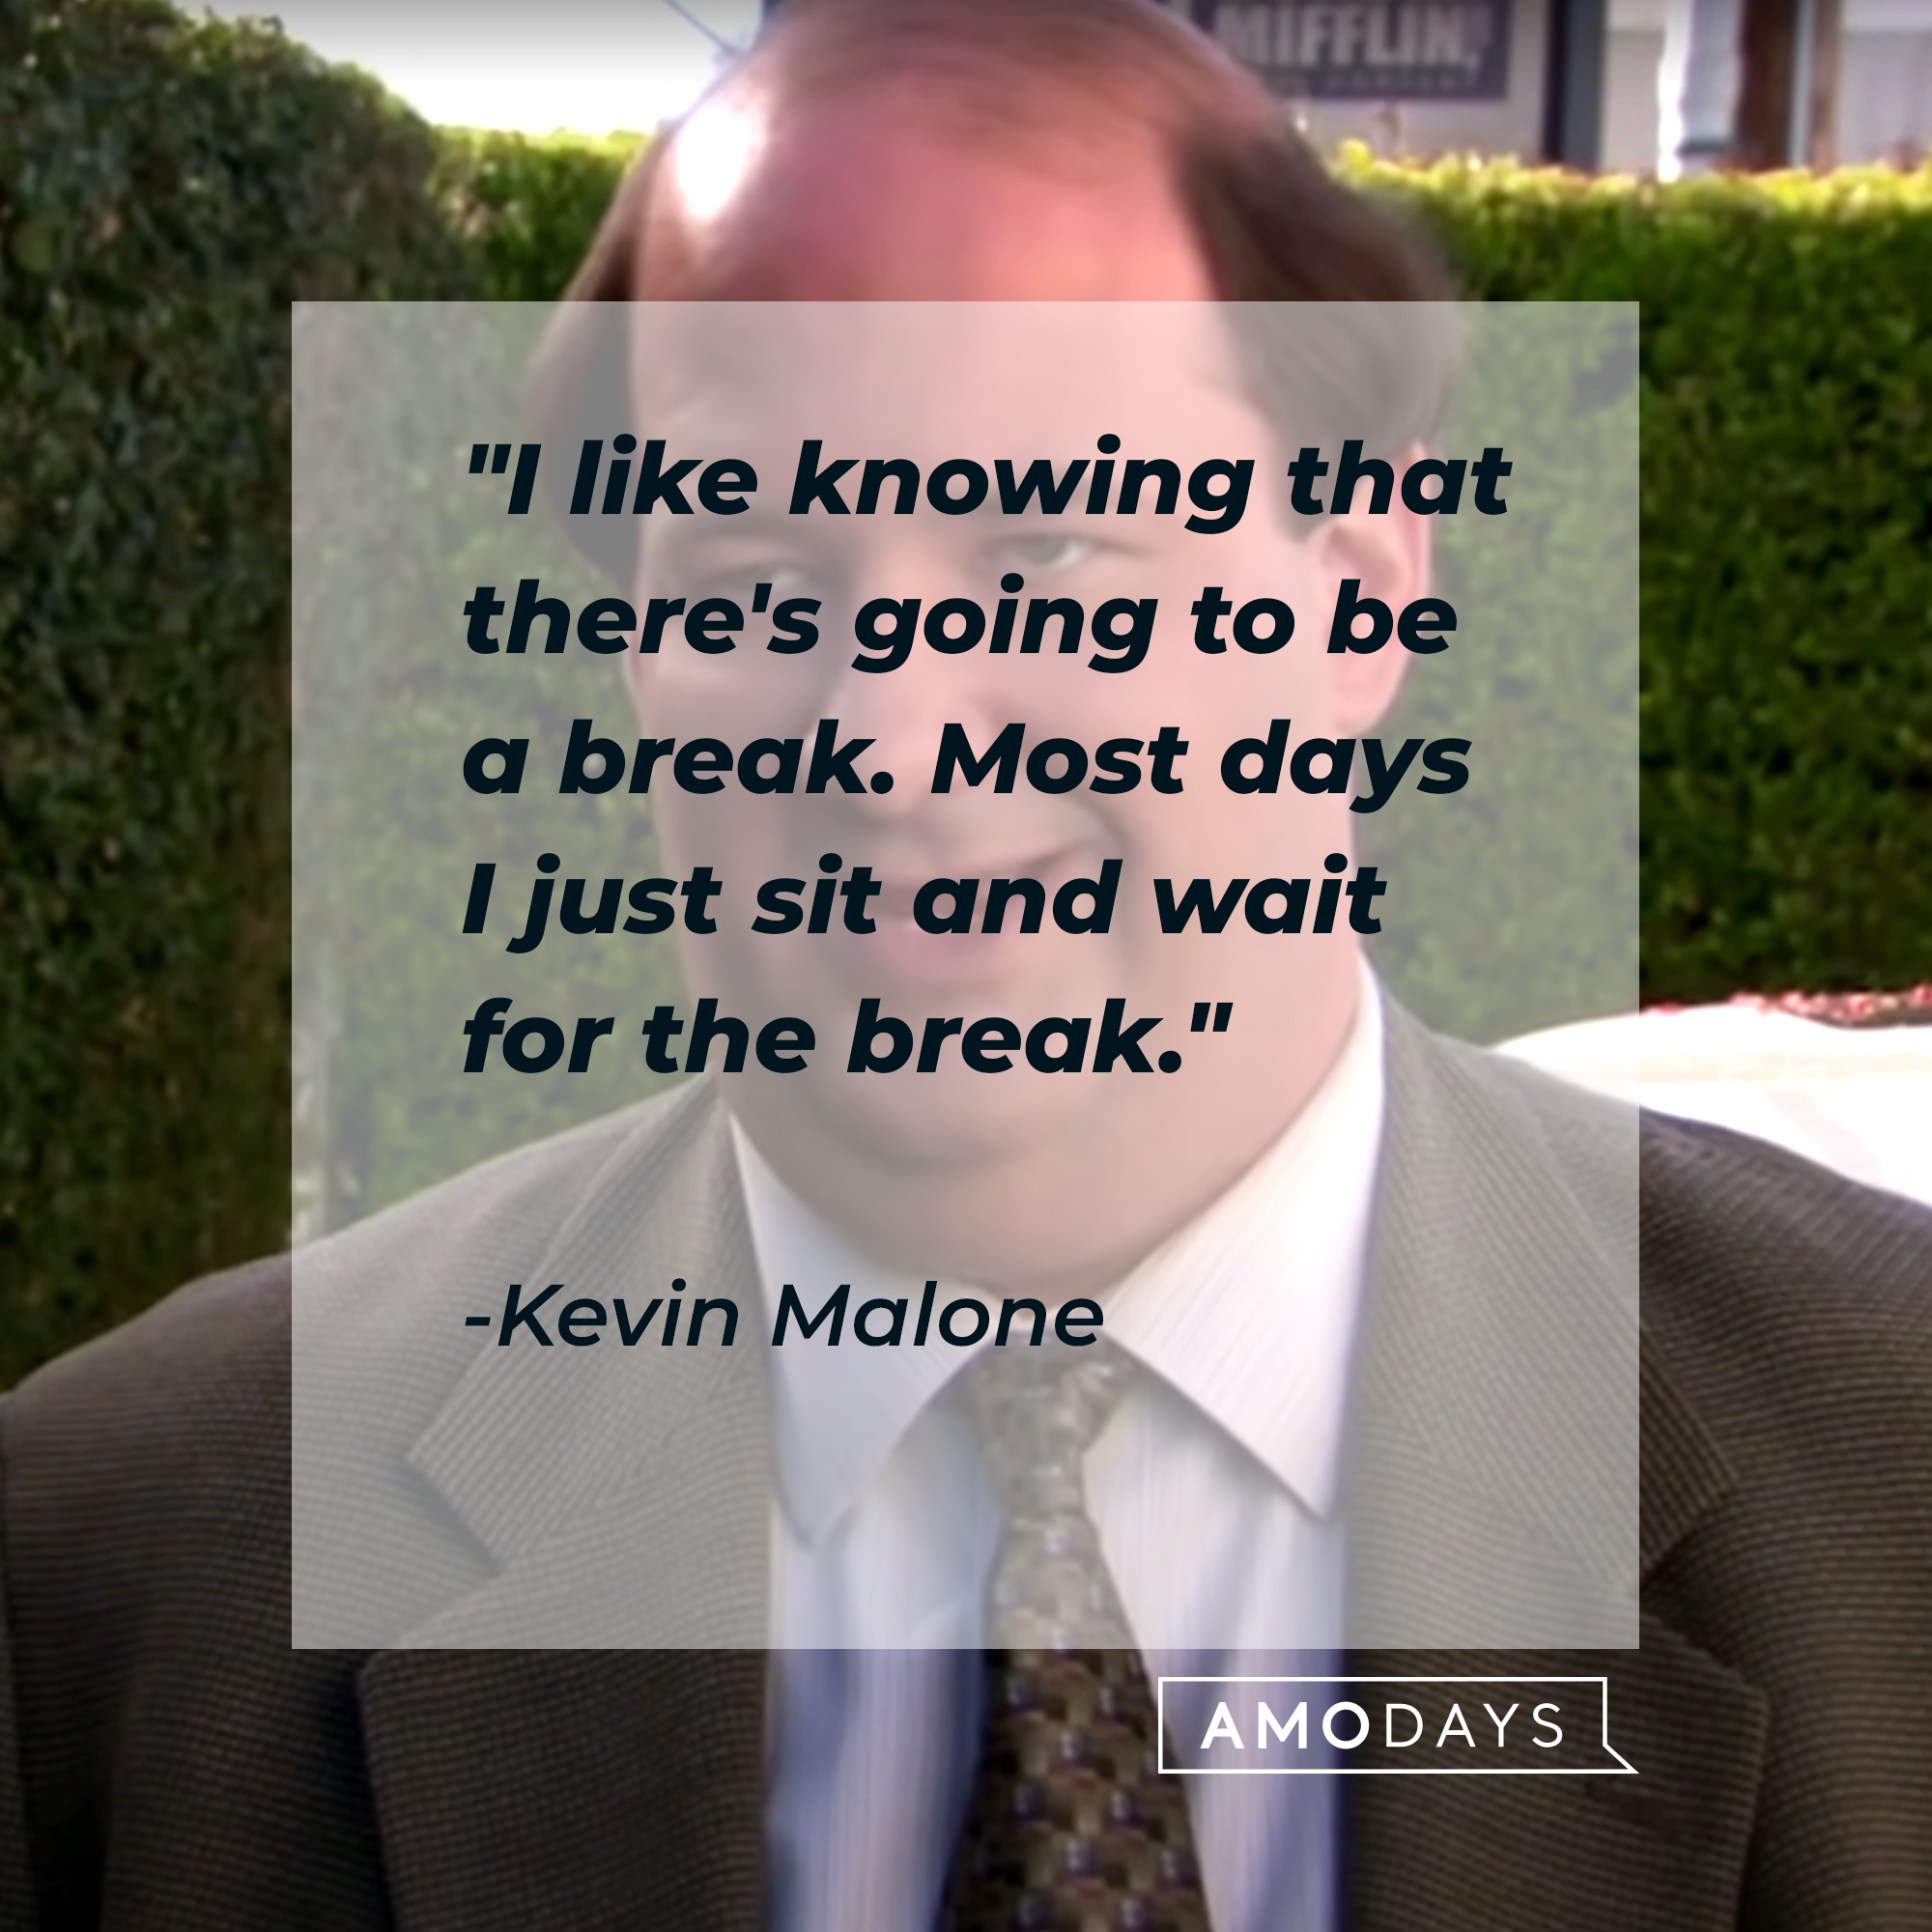 Kevin Malone's quote: "I like knowing that there's going to be a break. Most days I just sit and wait for the break." | Source: youtube.com/TheOffice